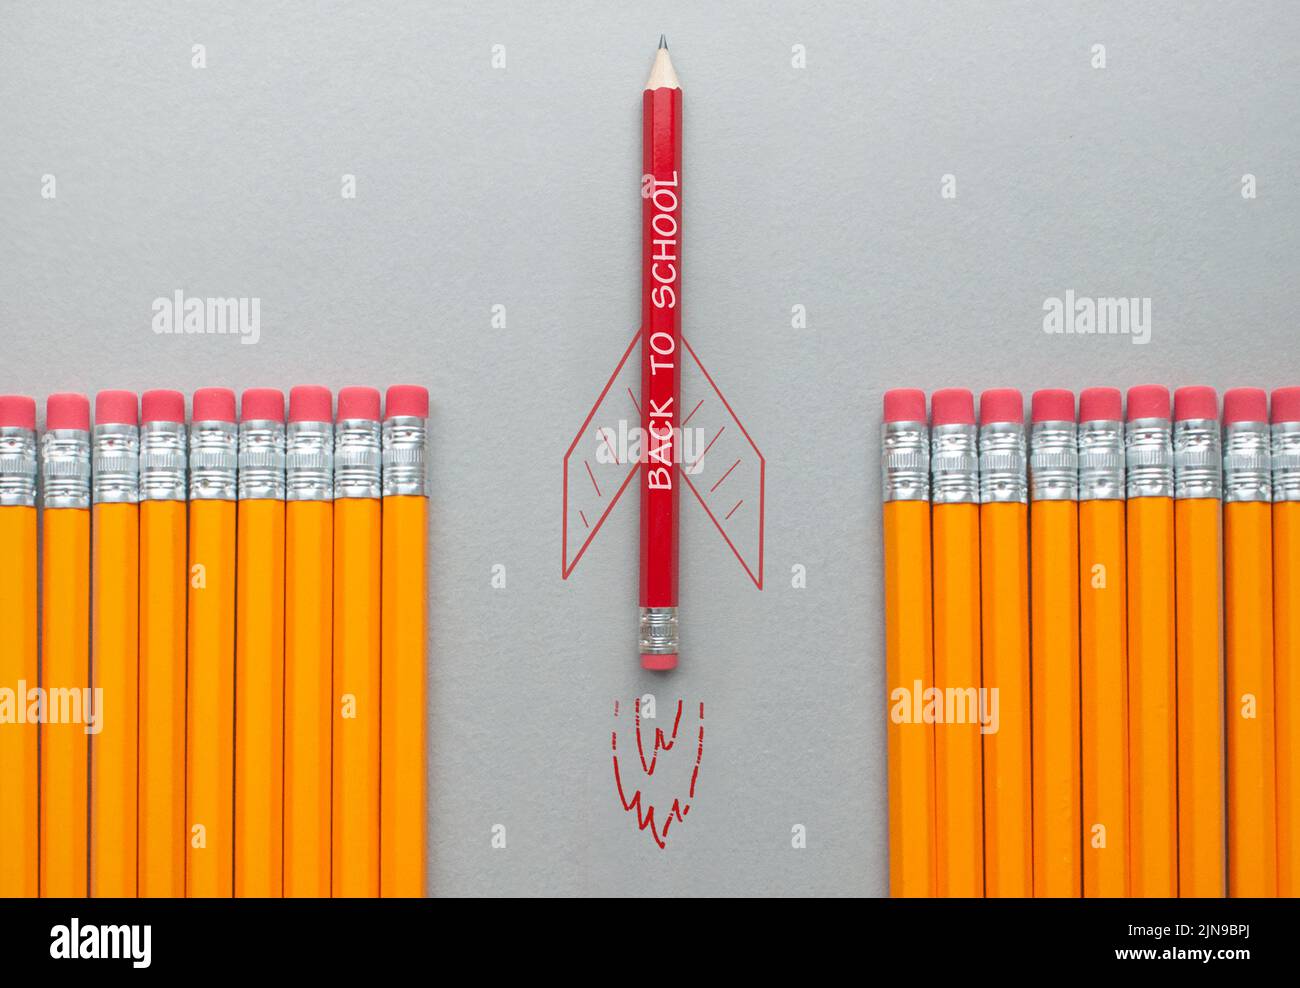 Back to school red pencil with rocket sketch standing out amongst a row of orange pencils Stock Photo